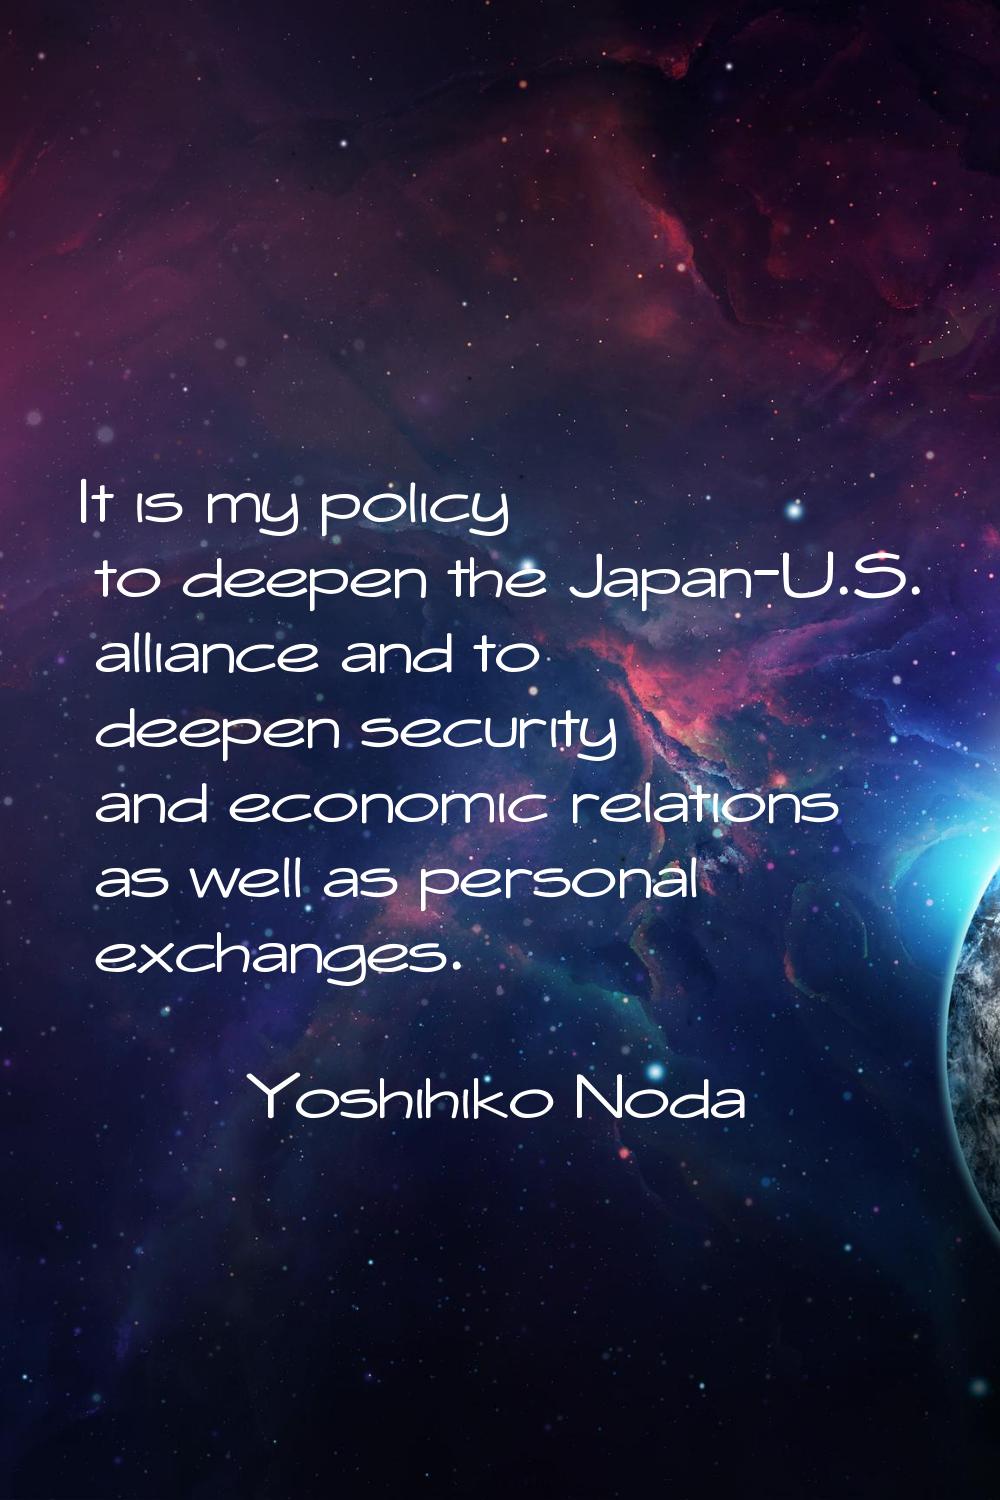 It is my policy to deepen the Japan-U.S. alliance and to deepen security and economic relations as 